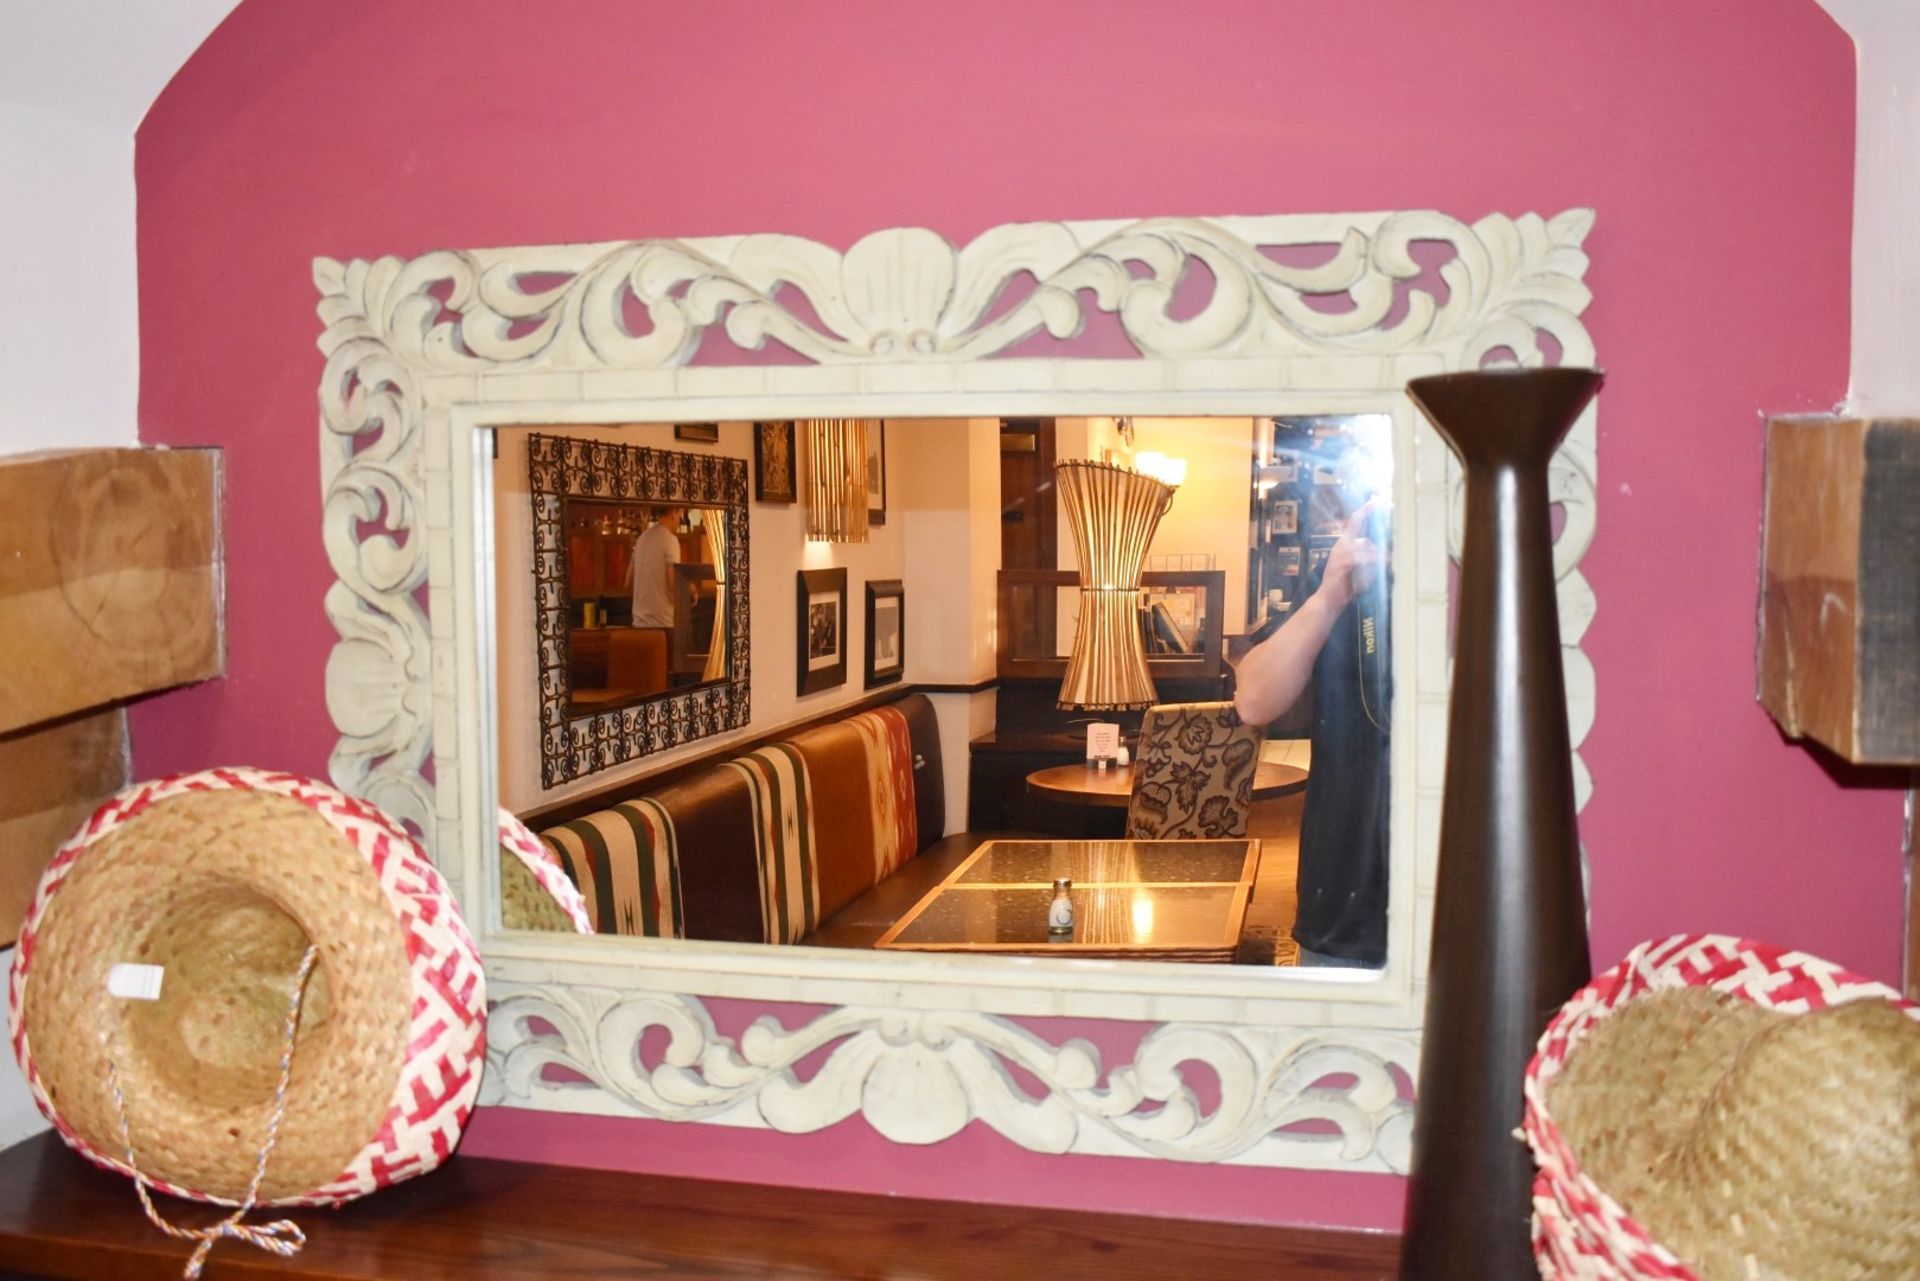 3 x Large Rectangular Wall Mirrors With Ornate Carved Wooden Frames In A Rustic White Wash - Image 2 of 5